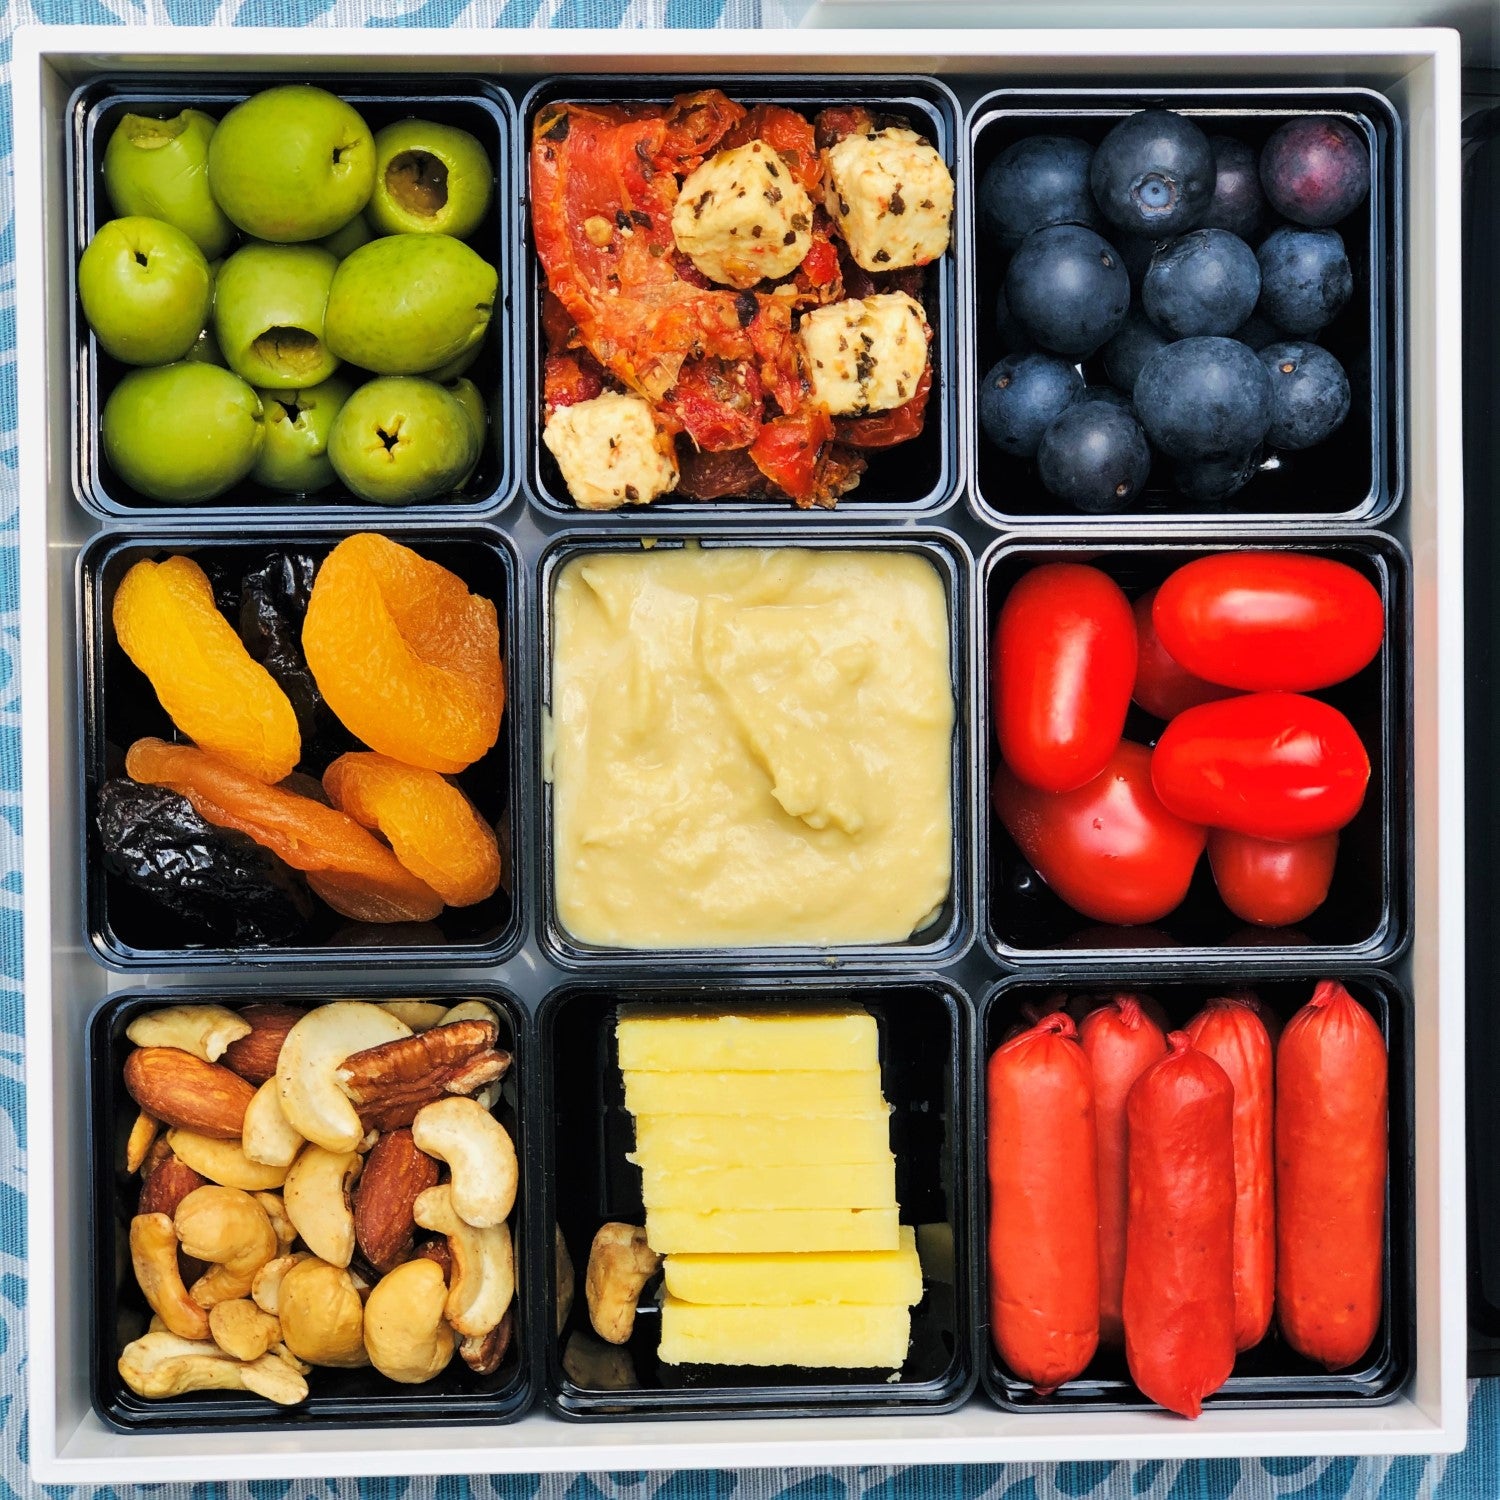 Nine different foods in the small containers of this picnic bento box.